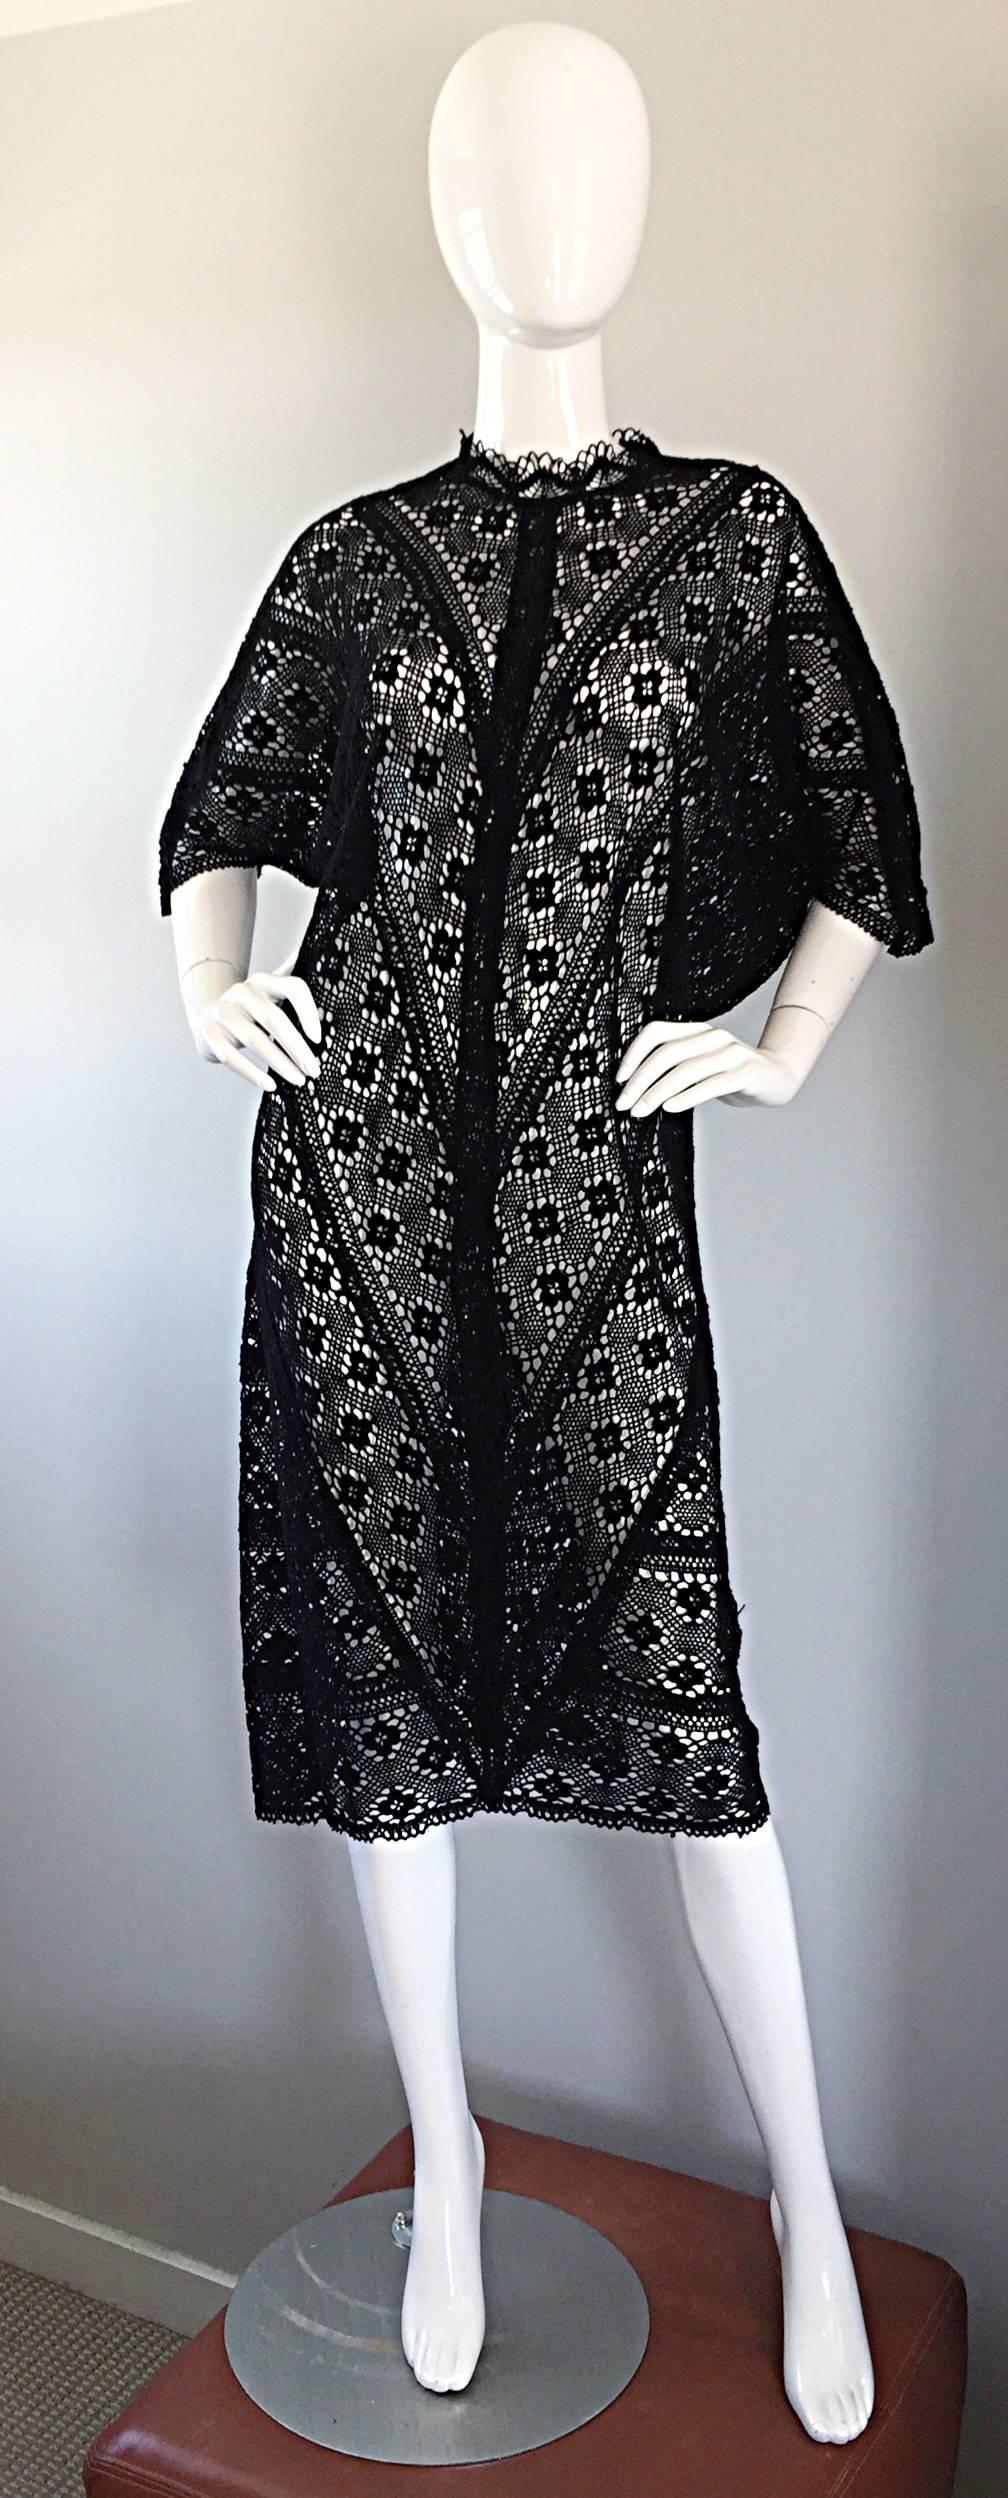 Wonderful and rare 1970s TACHI CASTILLO Taxco black hand crochet / embroidered kaftan! I have had the pleasure of owning several Tachi Castillo pieces, but this is hands down the most amazing! Tachi was well known in Mexico for her impeccable